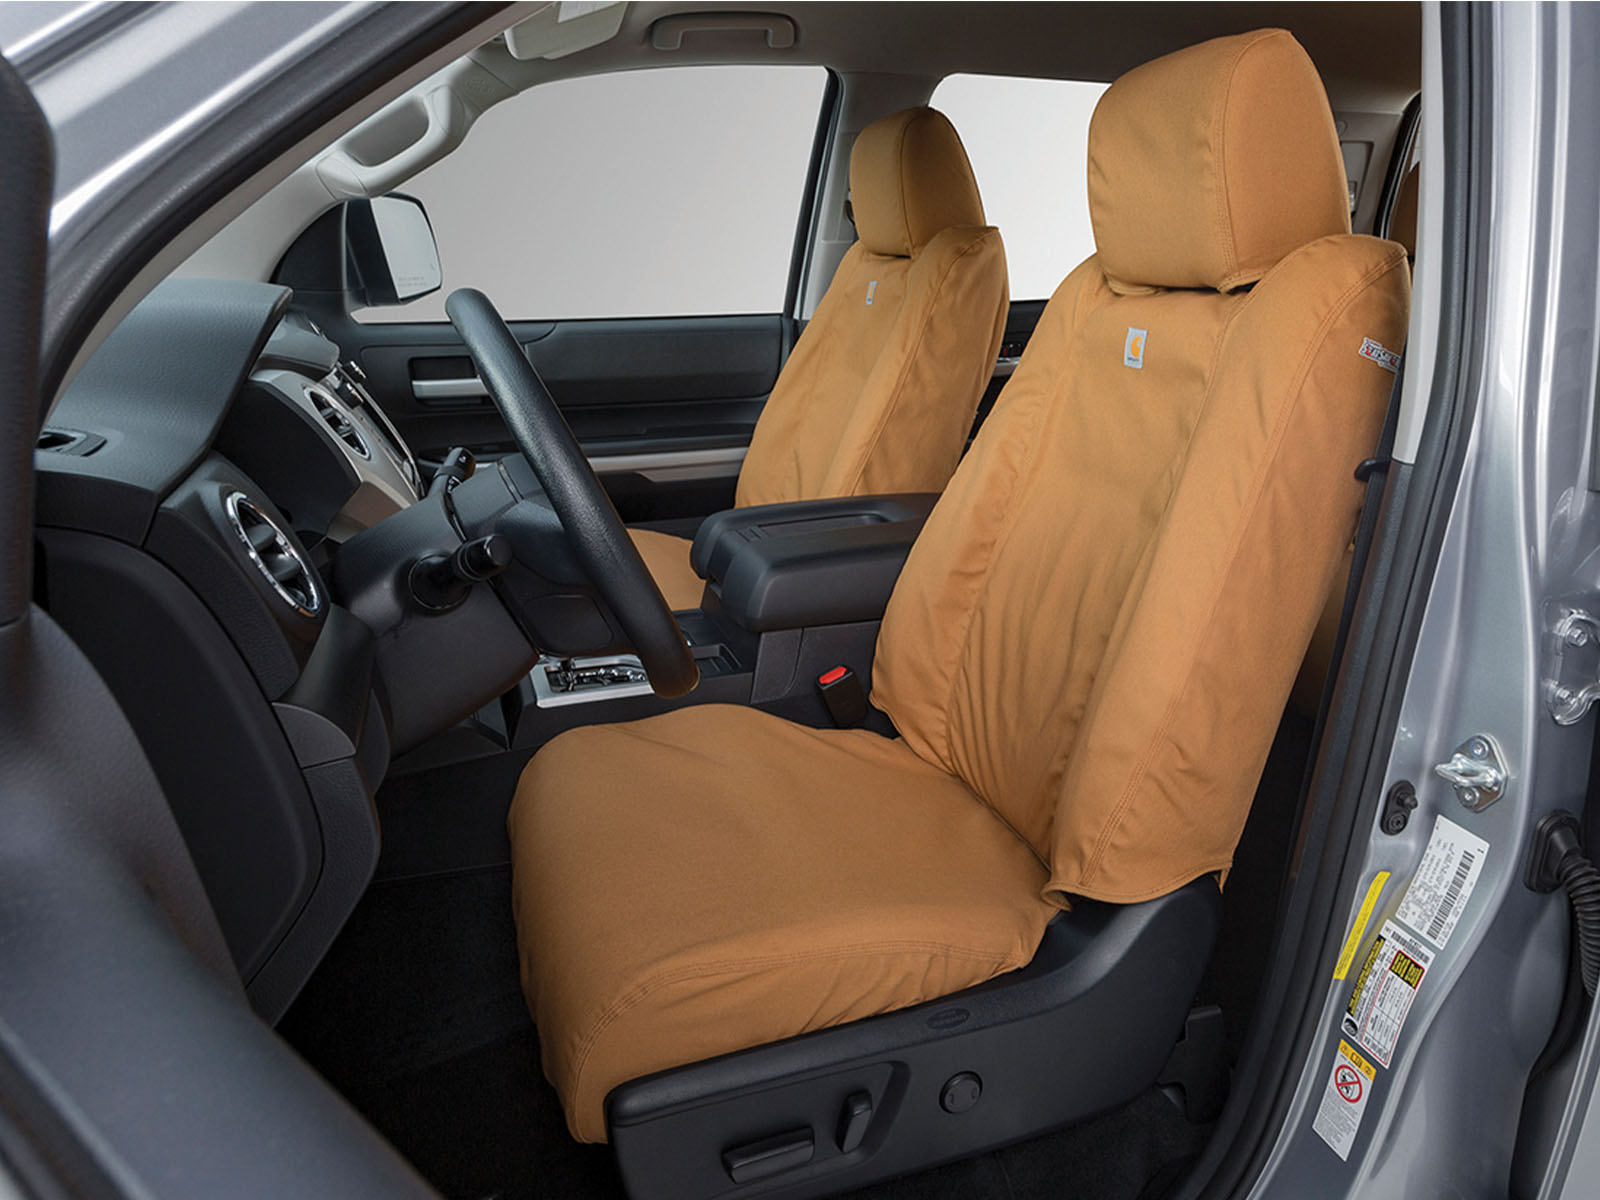 2018 Ford F150 Seat Covers Realtruck - Seat Covers For A 2018 Ford F 150